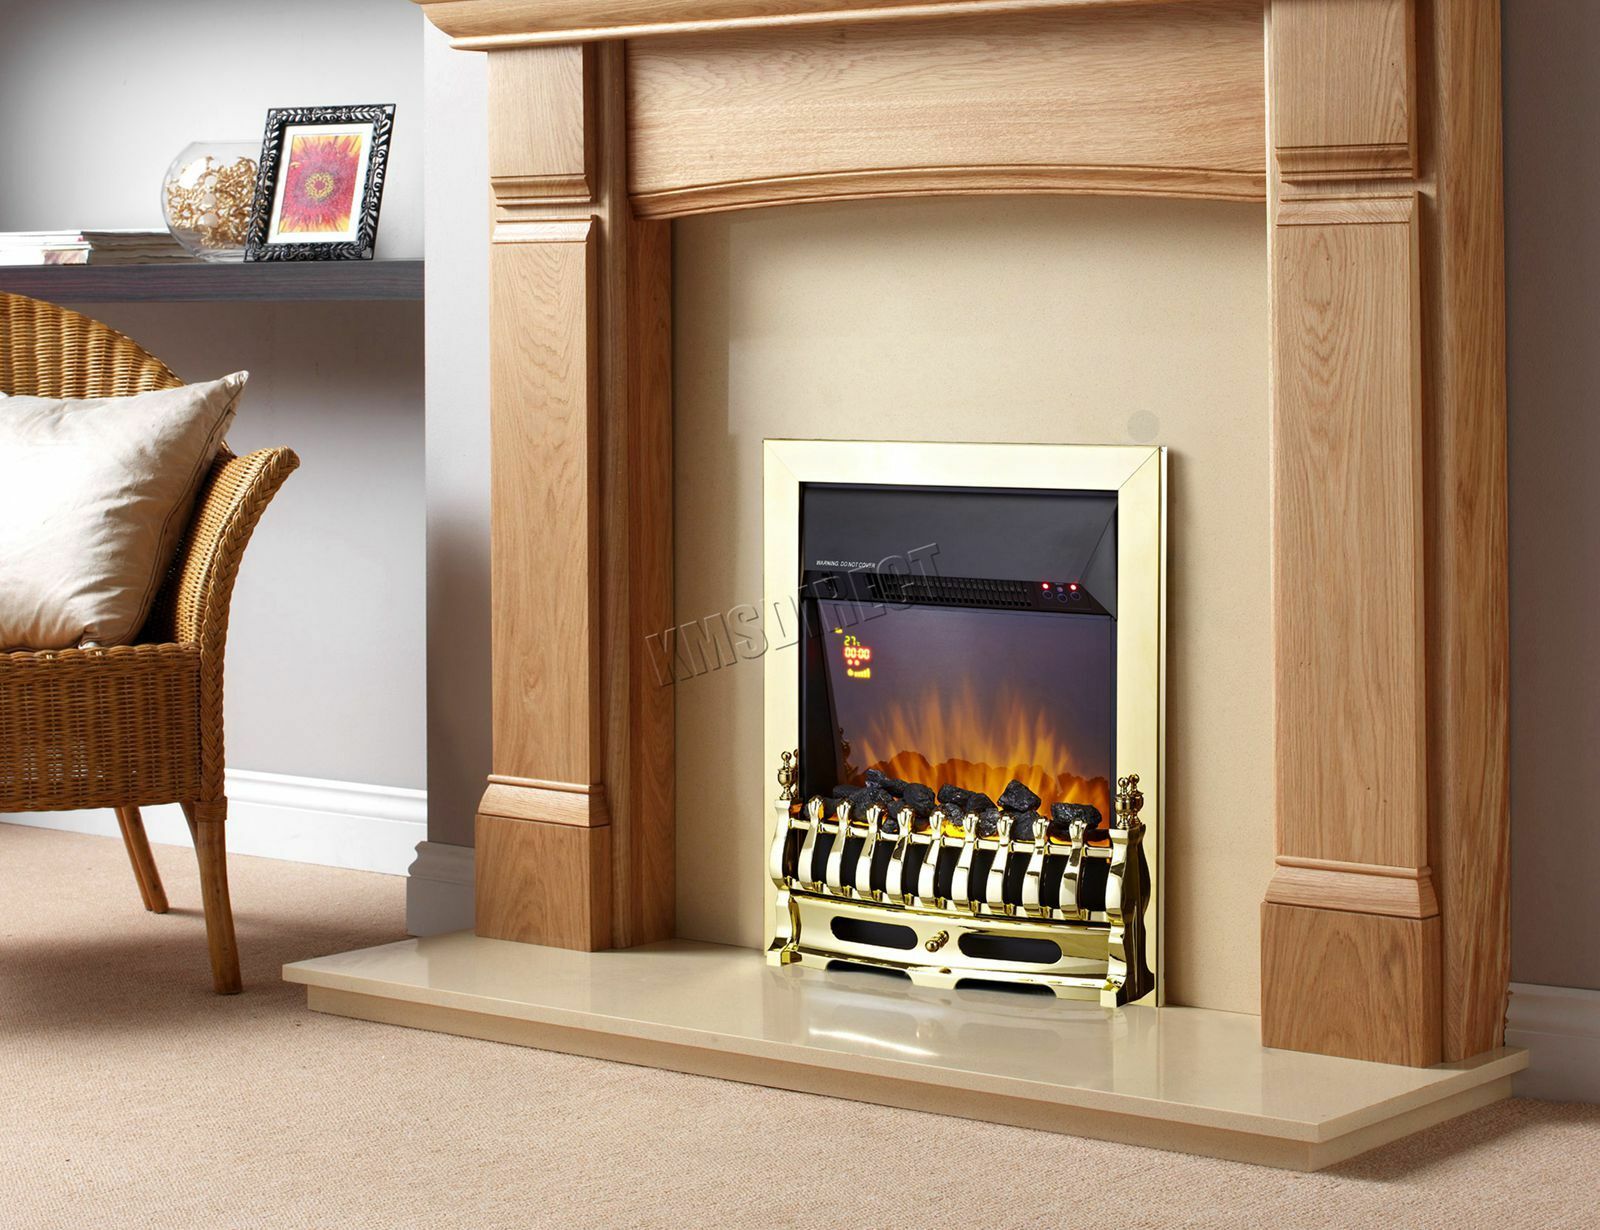 Fireplace Insert Electric Heater Best Of Ex Demo Foxhunter Electric Insert Fireplace Log Heater Flame 2kw Efi01